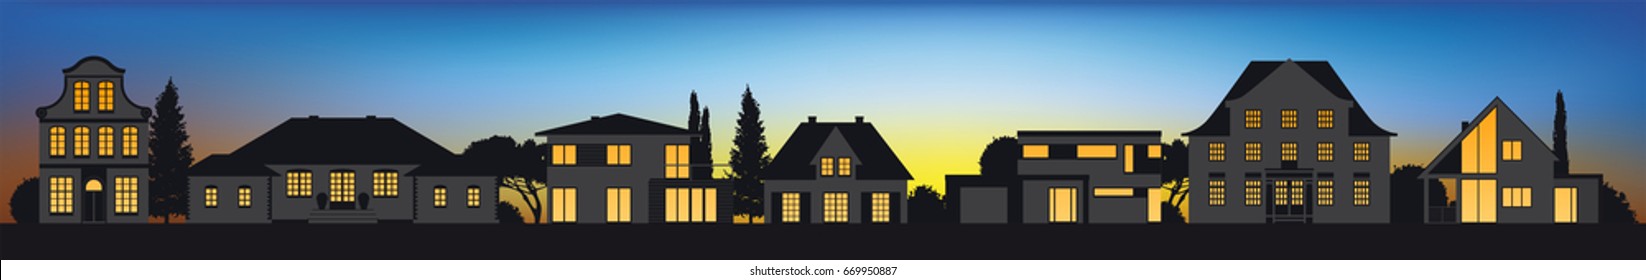 Different Vector House Pictograms In A Row In Sunset